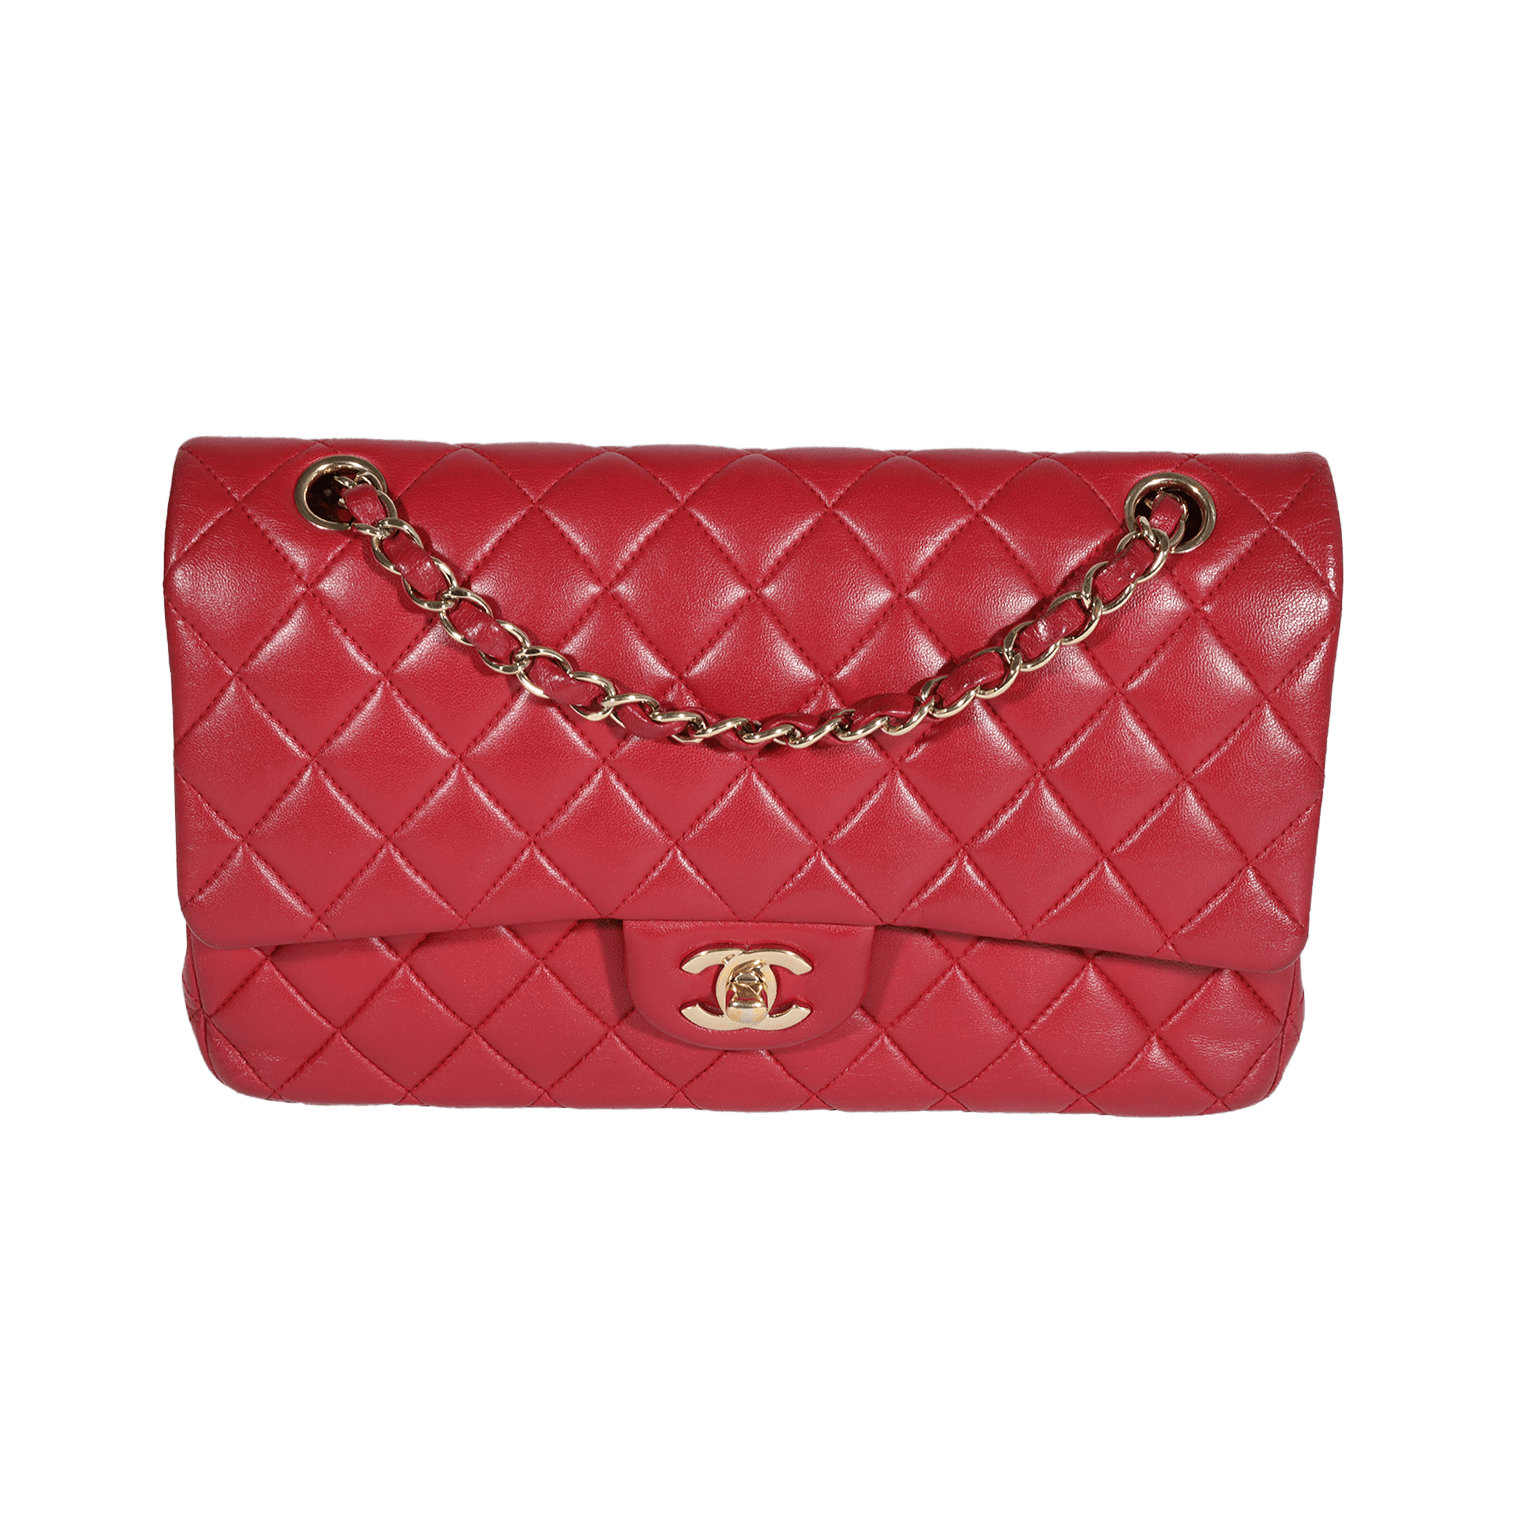 Chanel Chanel Red Quilted Lambskin Medium Classic Double Flap Bag